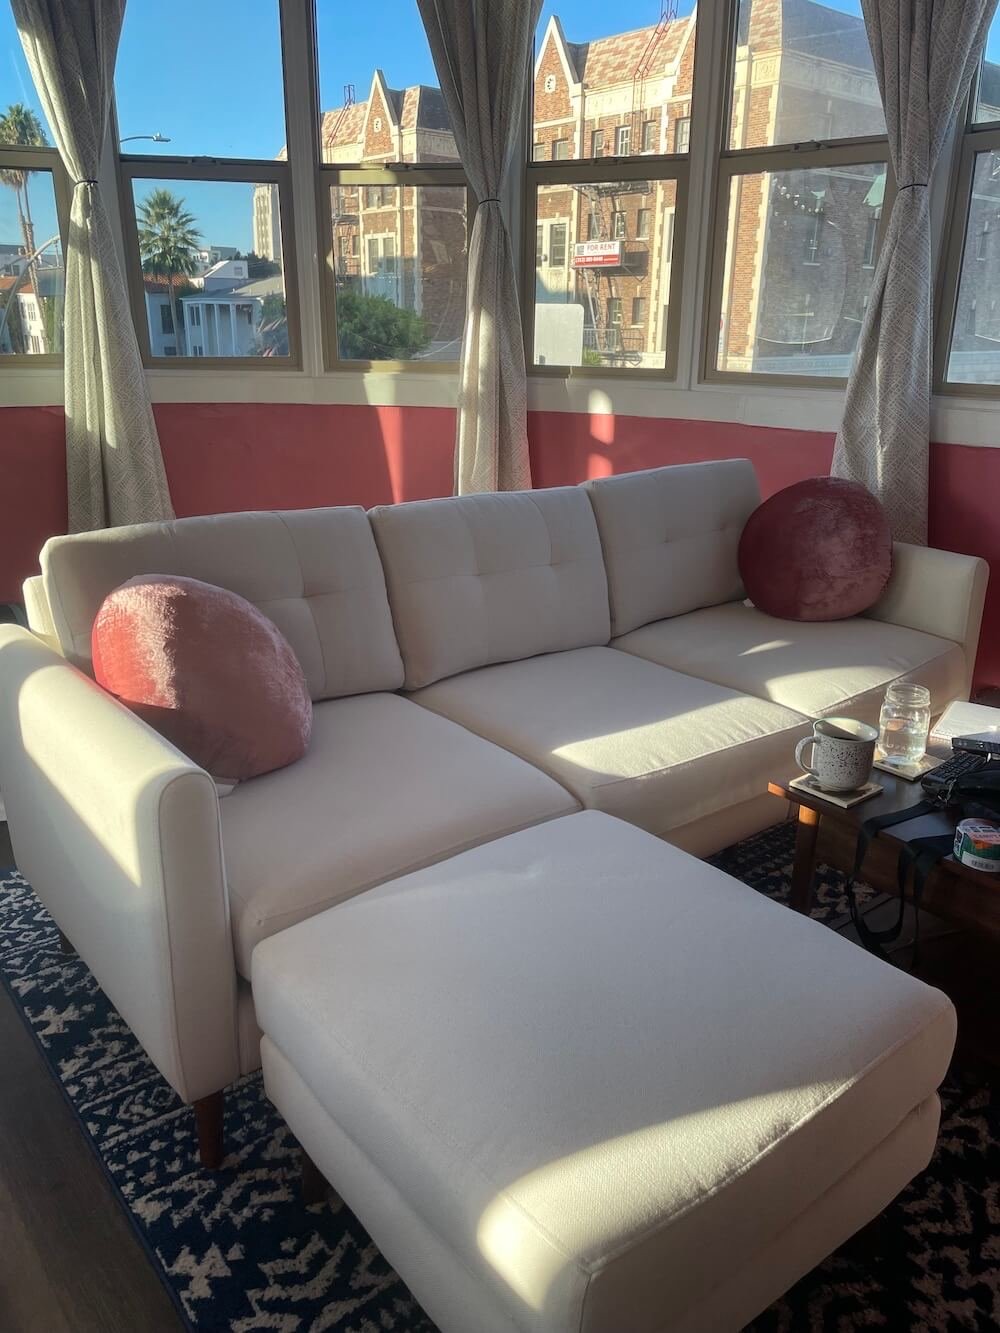 A beige sectional sofa with two pink round pillows from Burrow is placed in a TGT editor's sunlit room with red-painted walls and large windows showing a view of buildings outside. A small table with items sits next to the sofa.